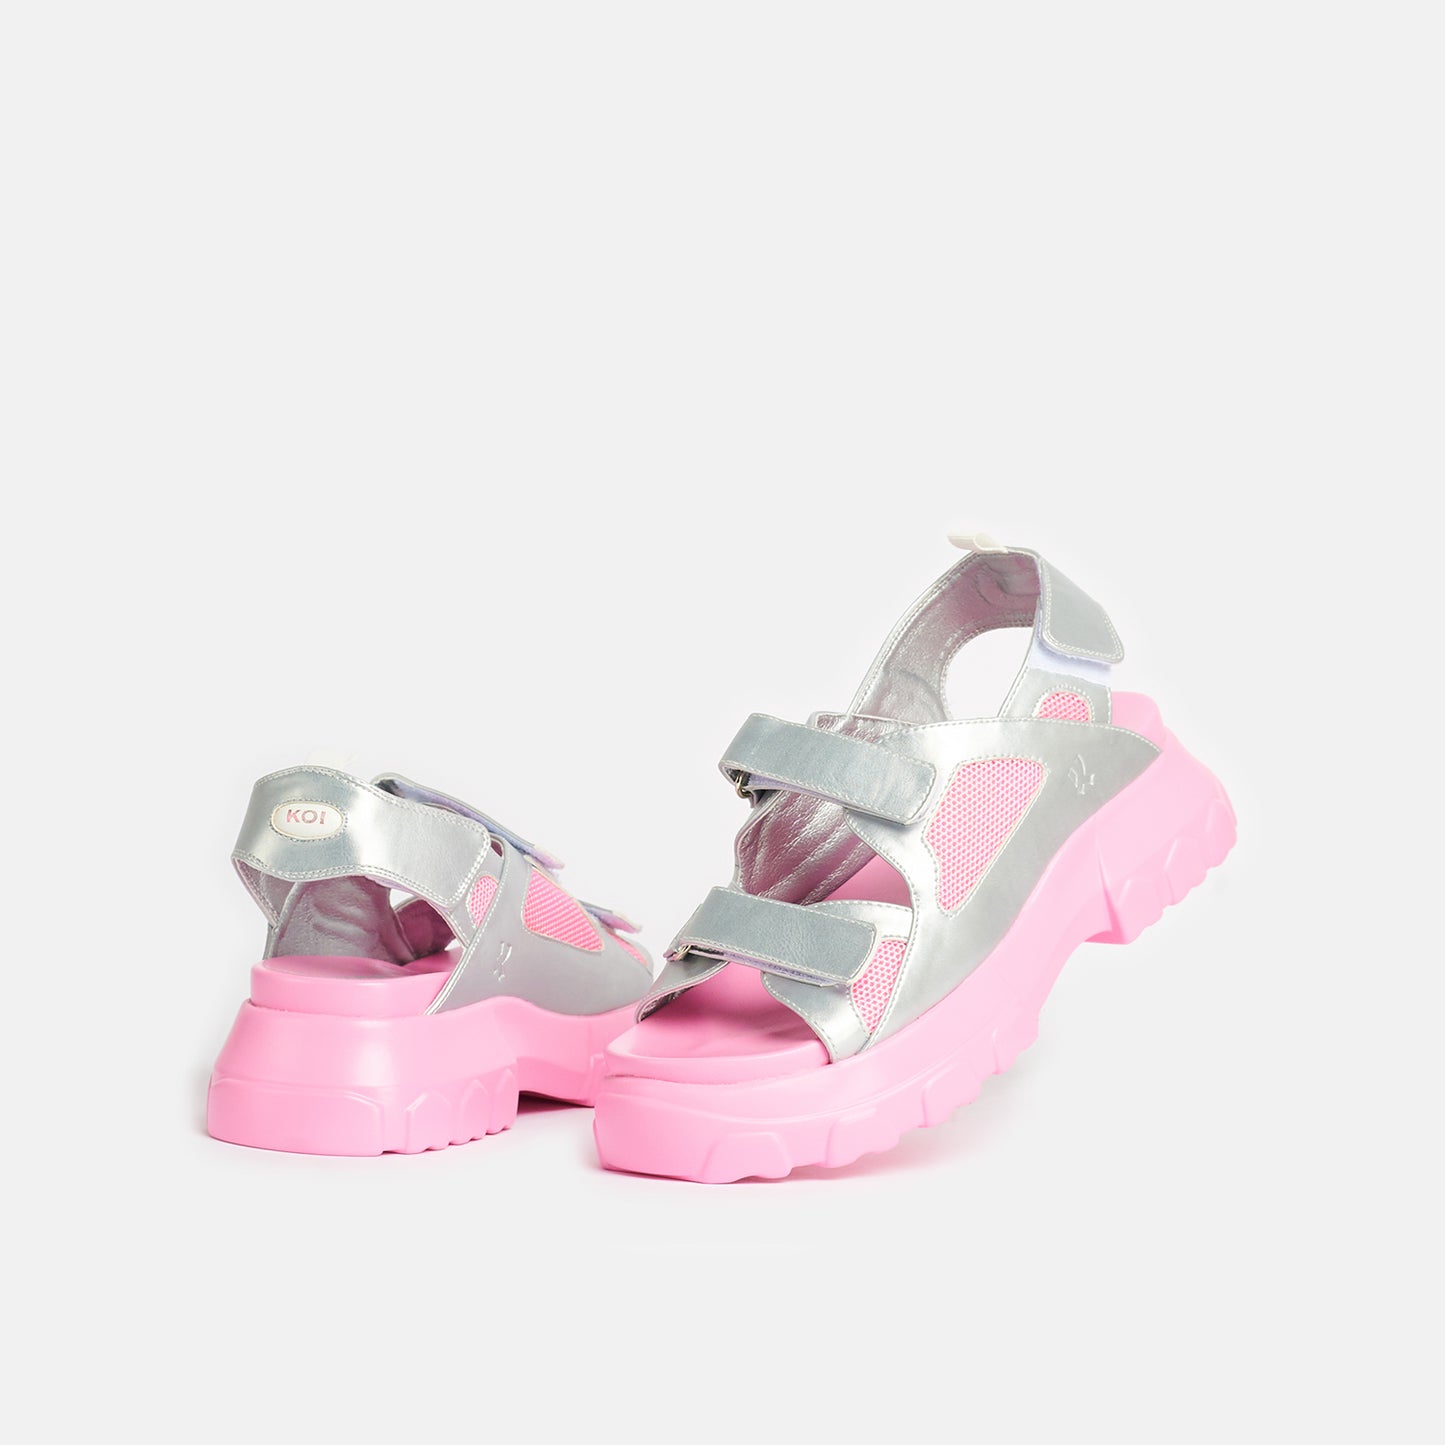 Fated Love Silver Chunky Sandals - Sandals - KOI Footwear - Silver - Three-Quarter View